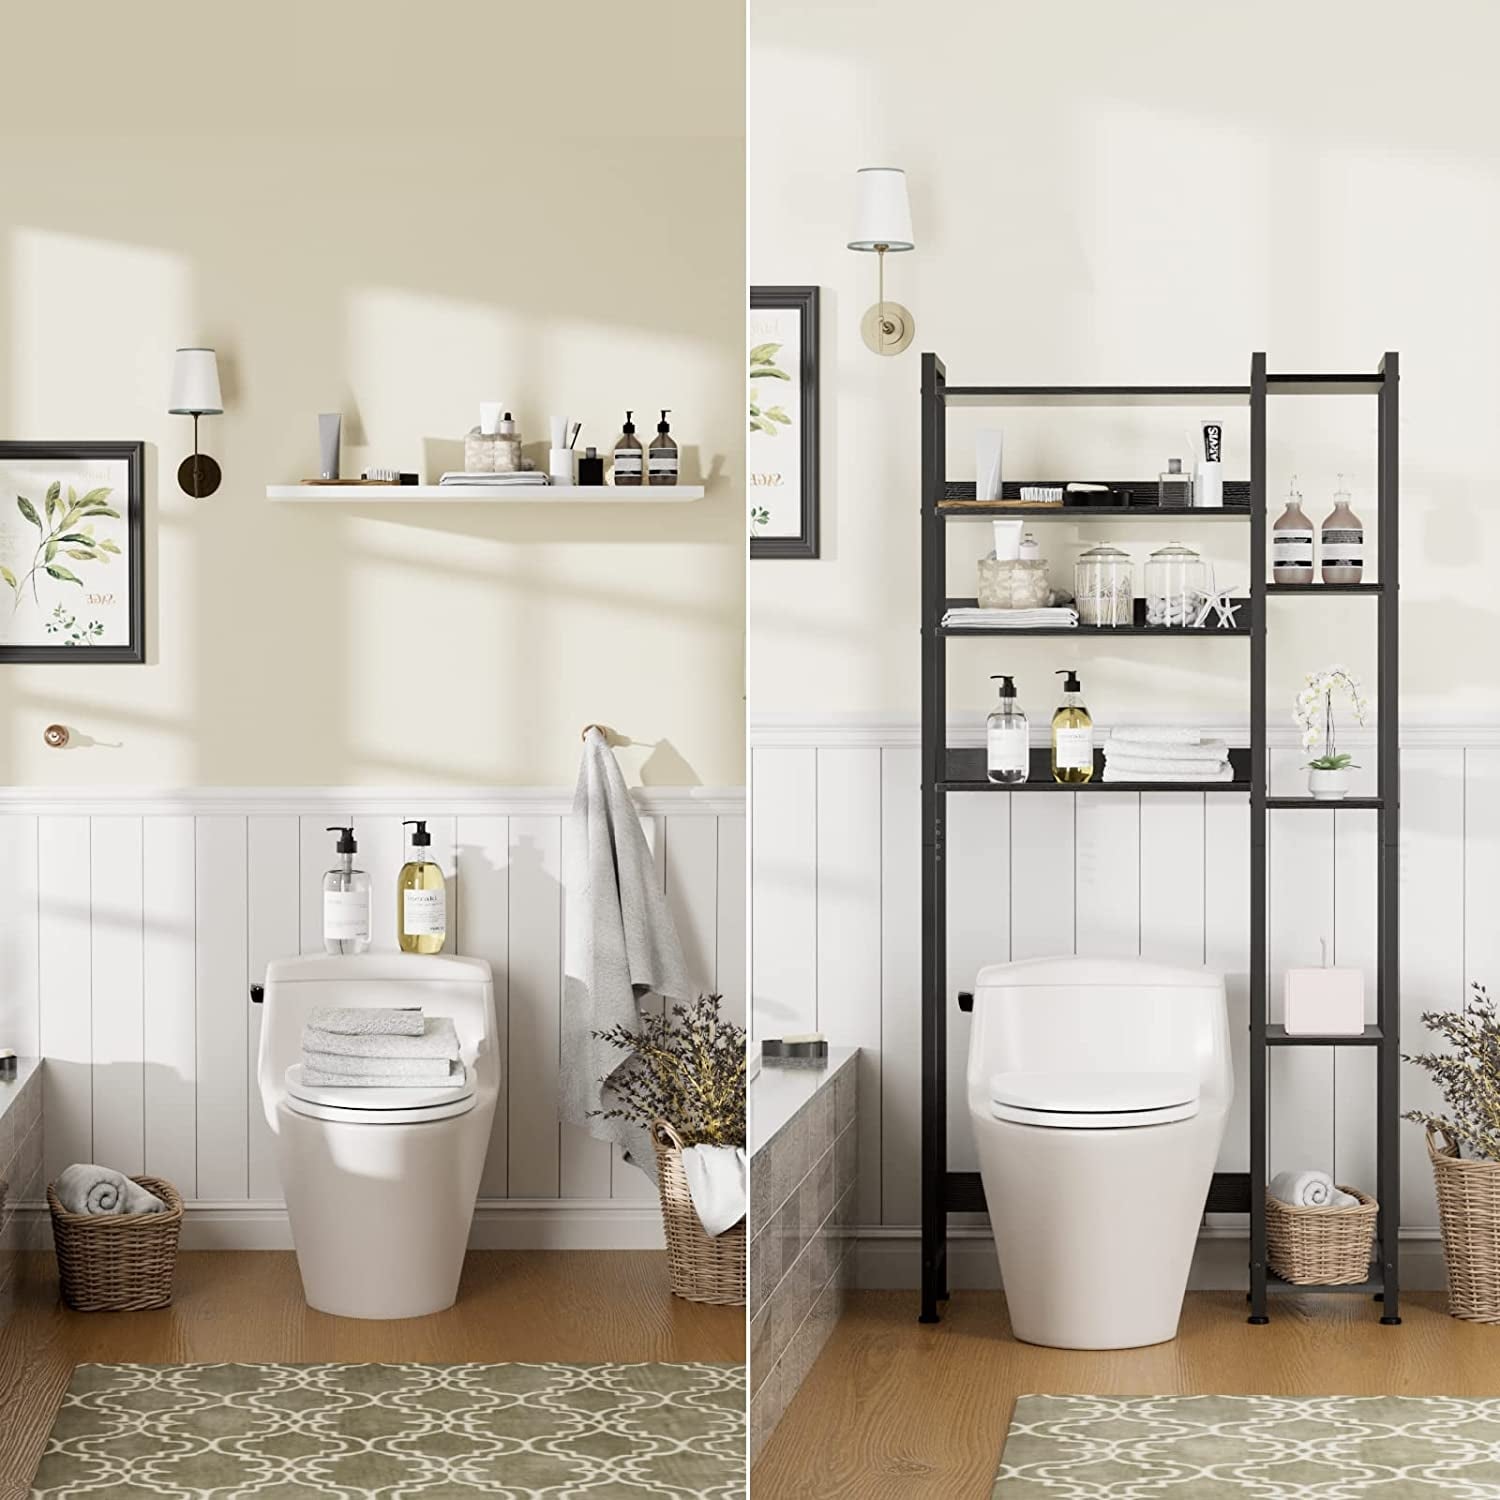 https://ak1.ostkcdn.com/images/products/is/images/direct/155dfcf3ed766a6a568fec908651a411aa87a3bf/Over-The-Toilet-Storage-Black%2C-4-Tier-Bathroom-Cabinet-with-Side-Shelves%2C-Freestanding-Rack-Restroom-Space-Saver.jpg